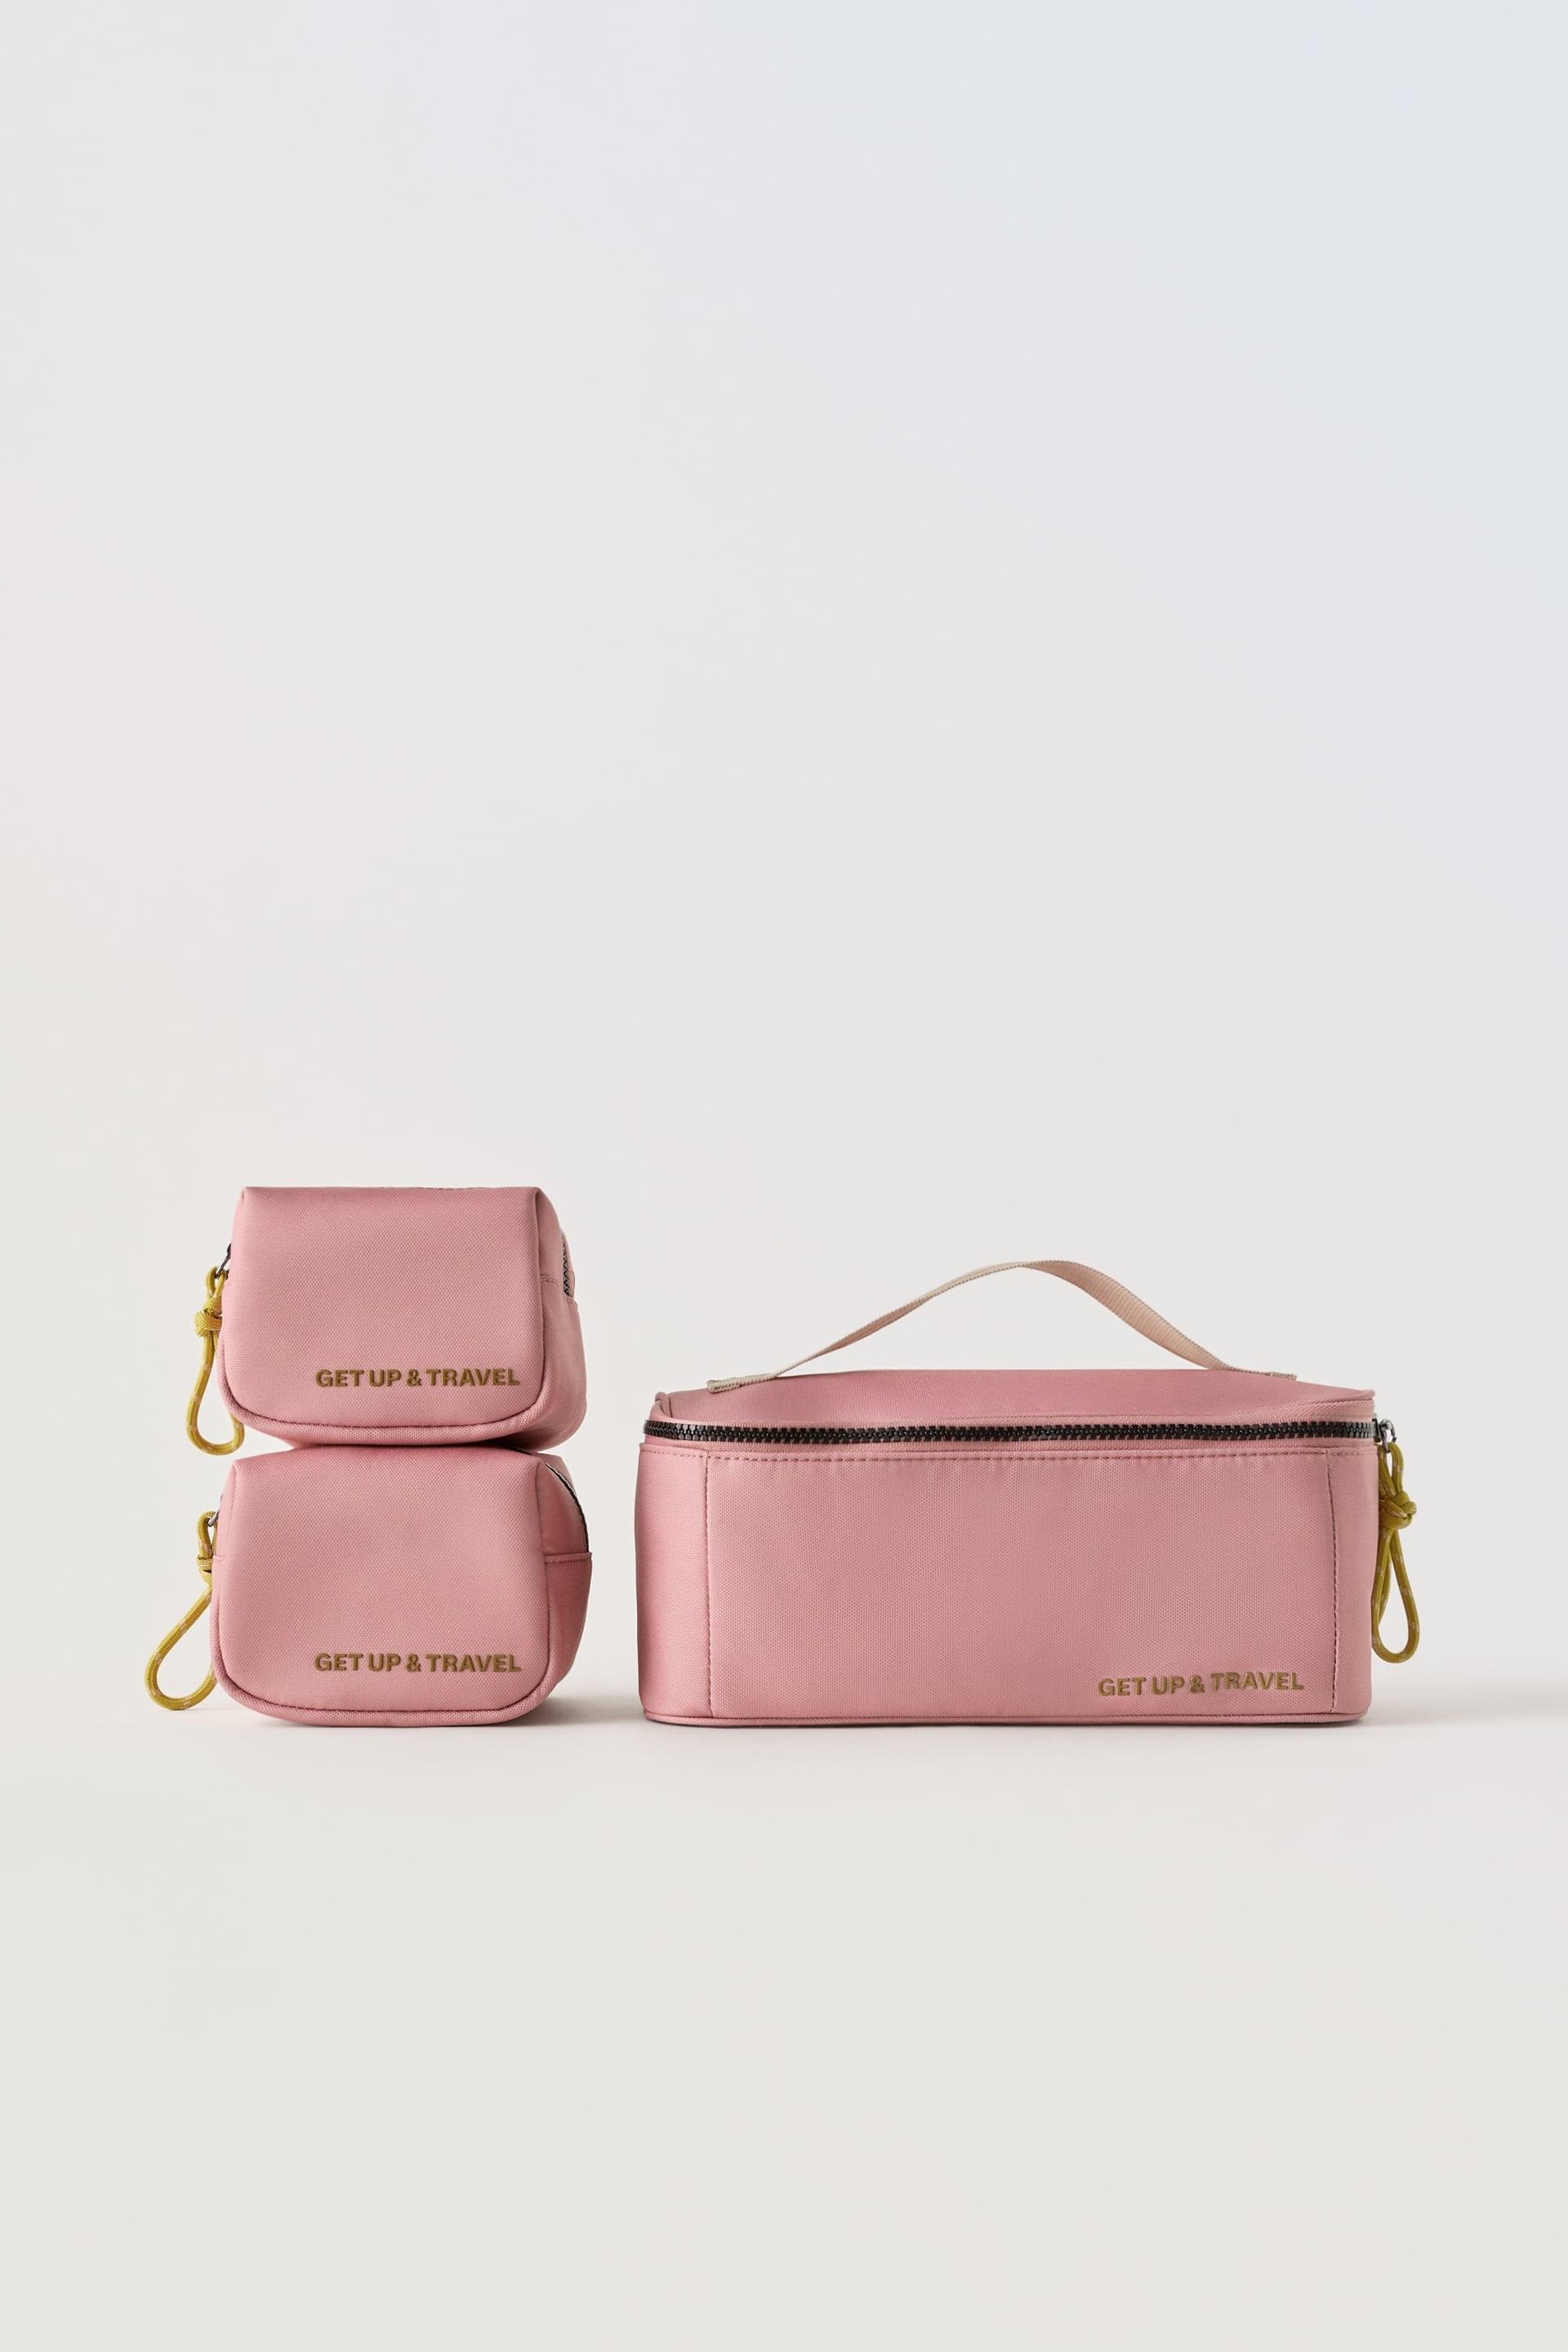 PACK OF TRAVEL TOILETRY BAGS by ZARA